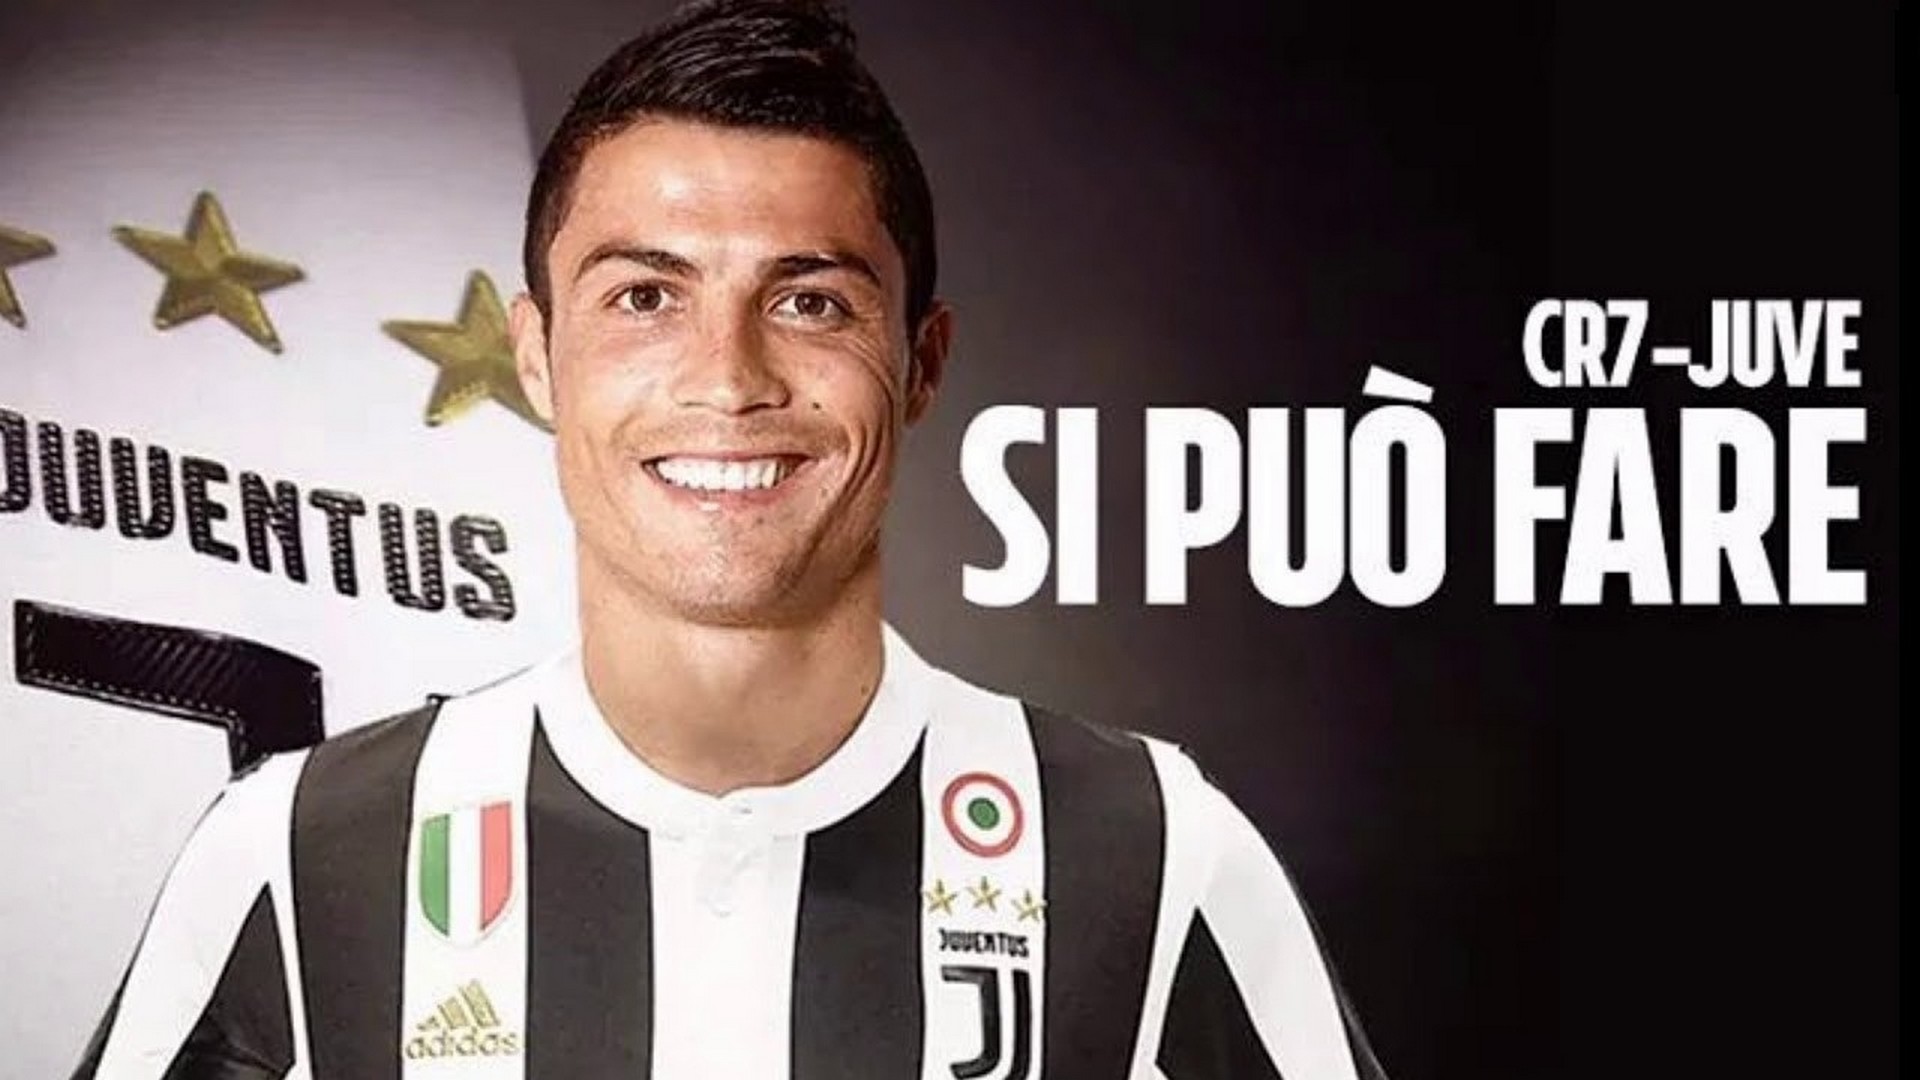 C Ronaldo Juventus Desktop Backgrounds With Resolution 1920X1080 pixel. You can make this wallpaper for your Desktop Computer Backgrounds, Mac Wallpapers, Android Lock screen or iPhone Screensavers